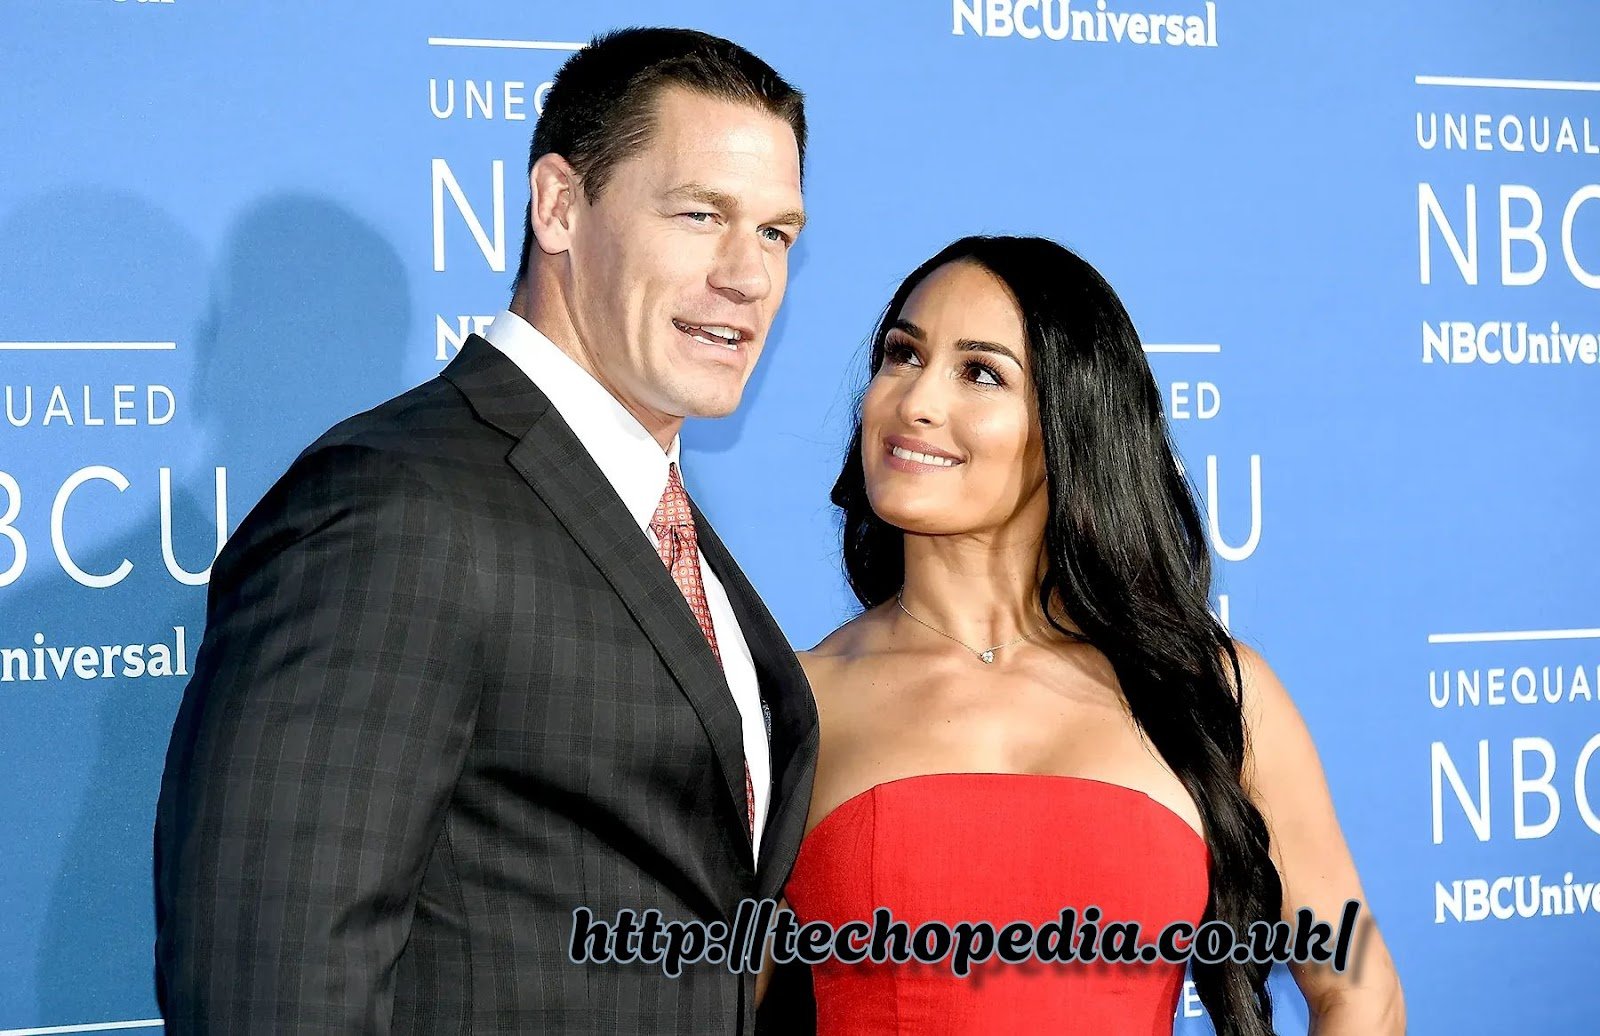 Elizabeth Huberdeau: A NO:1 Deep Dive into the Life of John Cena’s First Wife